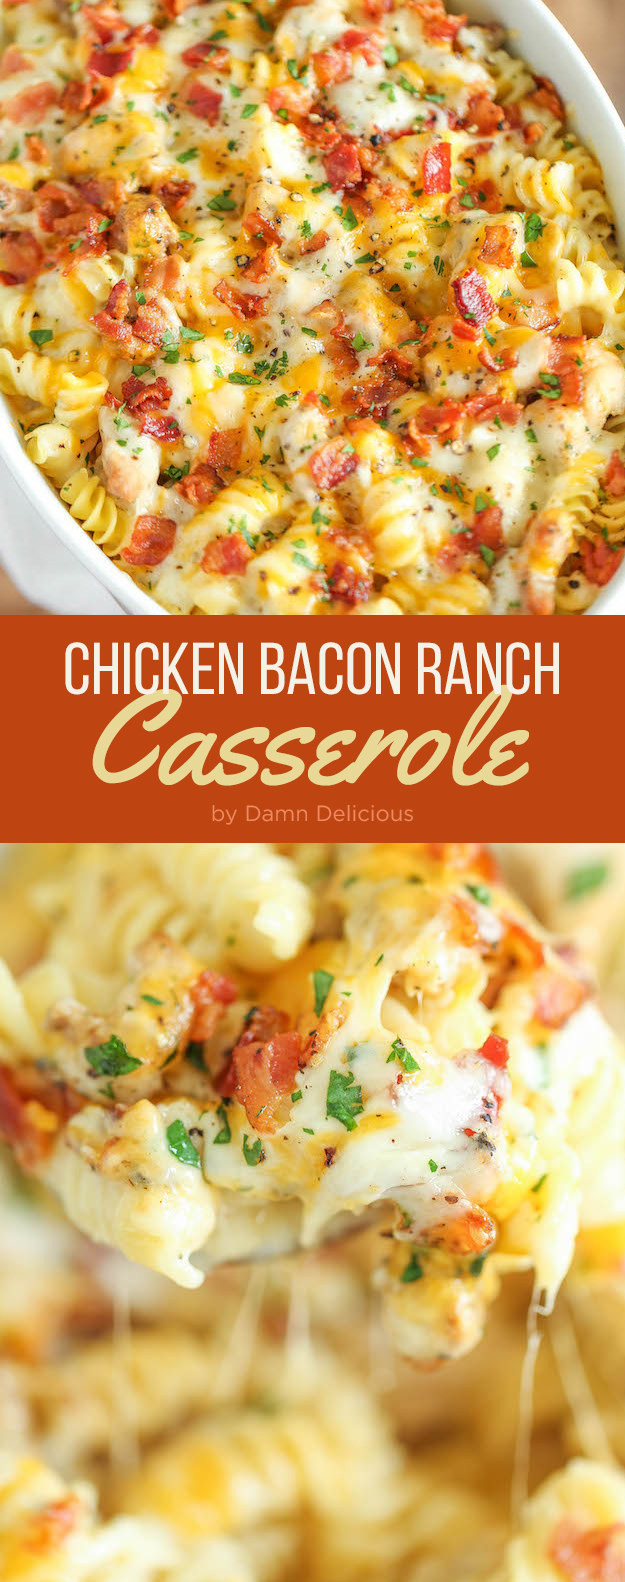 Chicken Bacon Ranch Casserole Facebook
 7 Awesome Ideas For Easy Weeknight Dinners